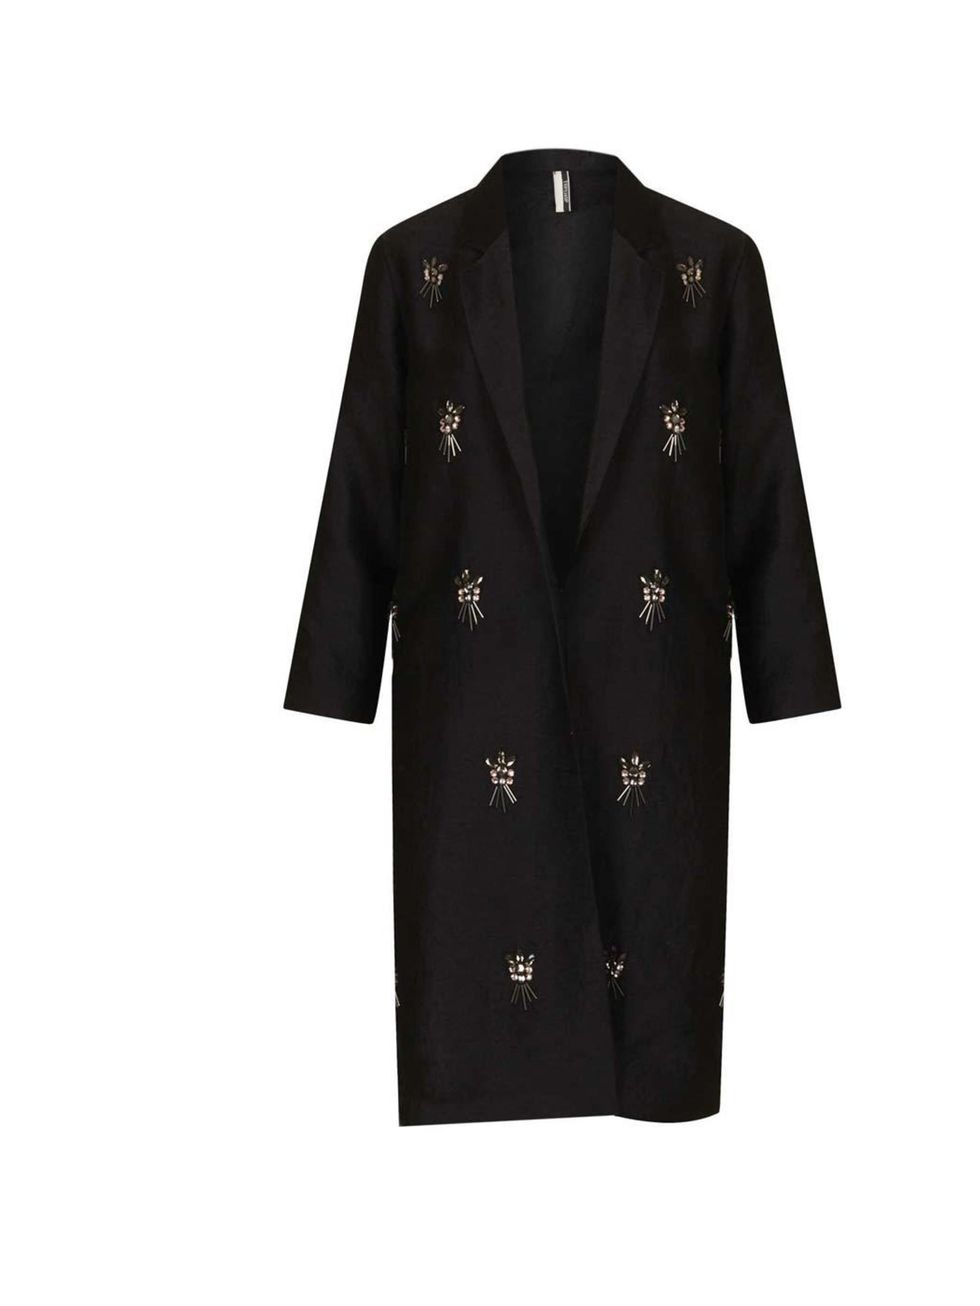 <p>A touch of embellishment is a node to the festive season...</p><p><a href="http://www.topshop.com/en/tsuk/product/clothing-427/jackets-coats-2390889/boyfriend-cocoon-coats-2391058/embellished-side-split-coat-2471349?refinements=category~%5B678007%7C208